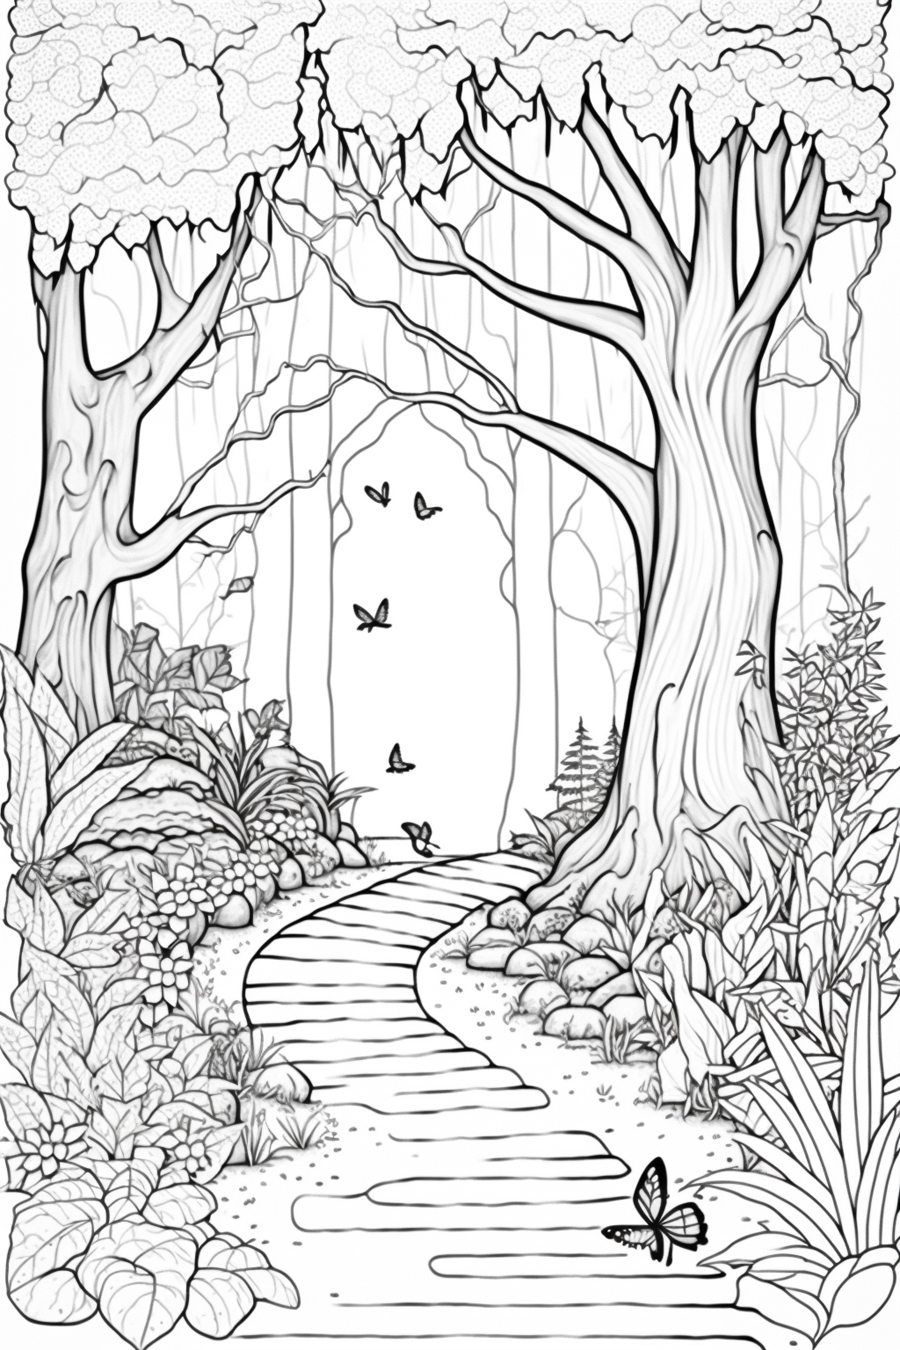 A coloring page with a path in the forest.